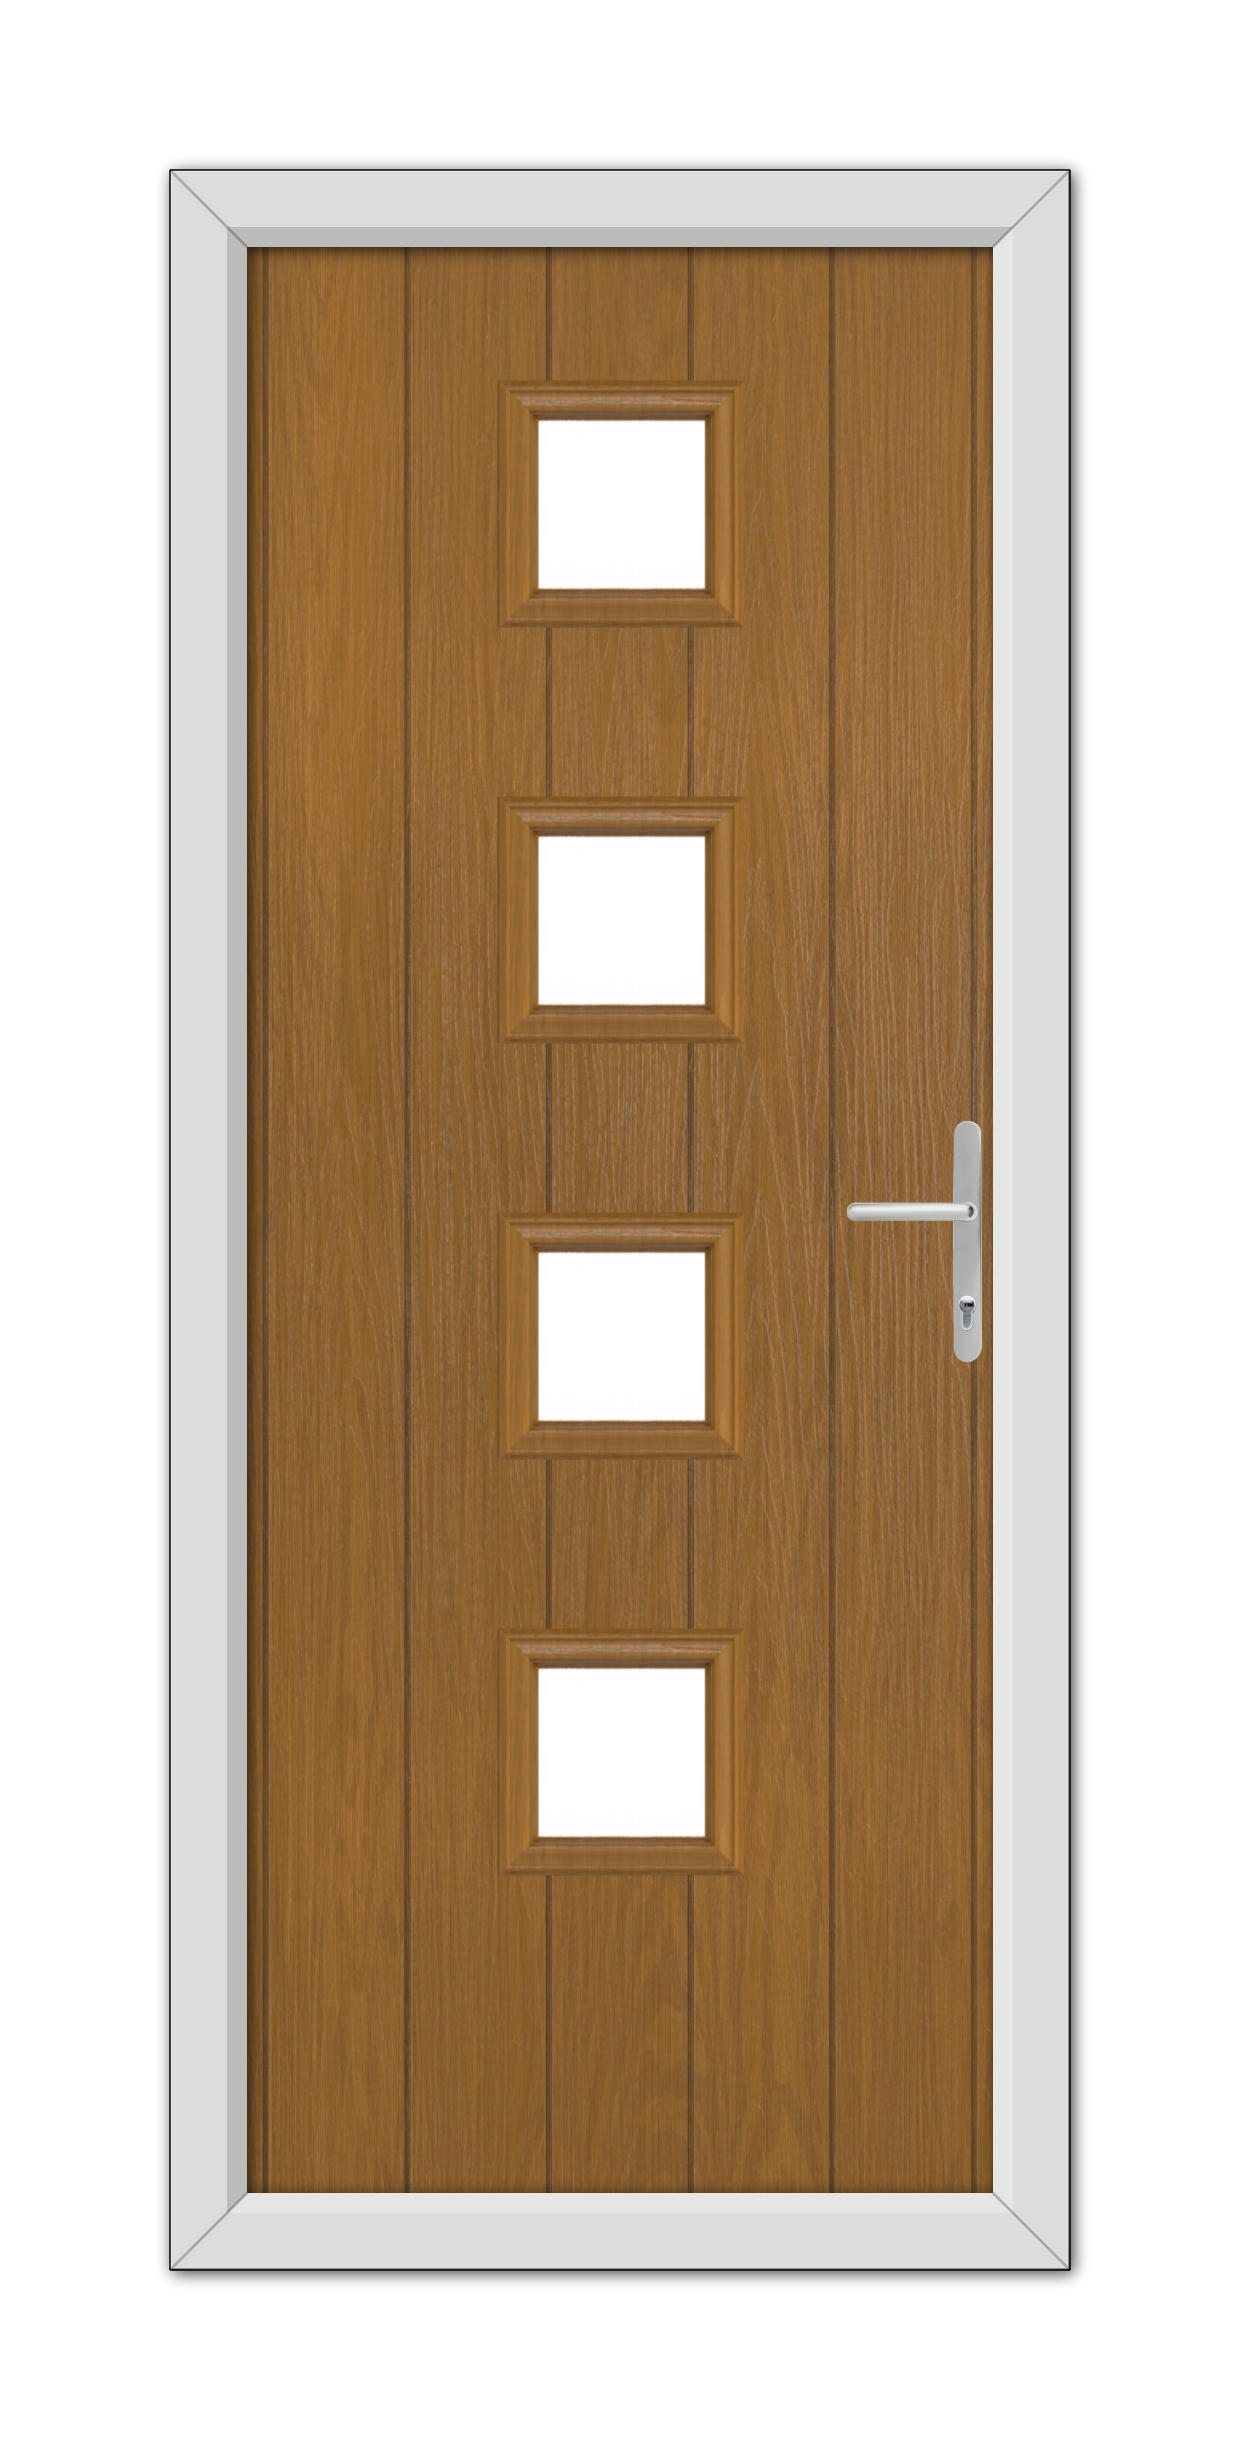 A modern Oak Hamilton Composite Door 48mm Timber Core with a silver handle and four rectangular glass panels, set in a white frame, isolated on a white background.